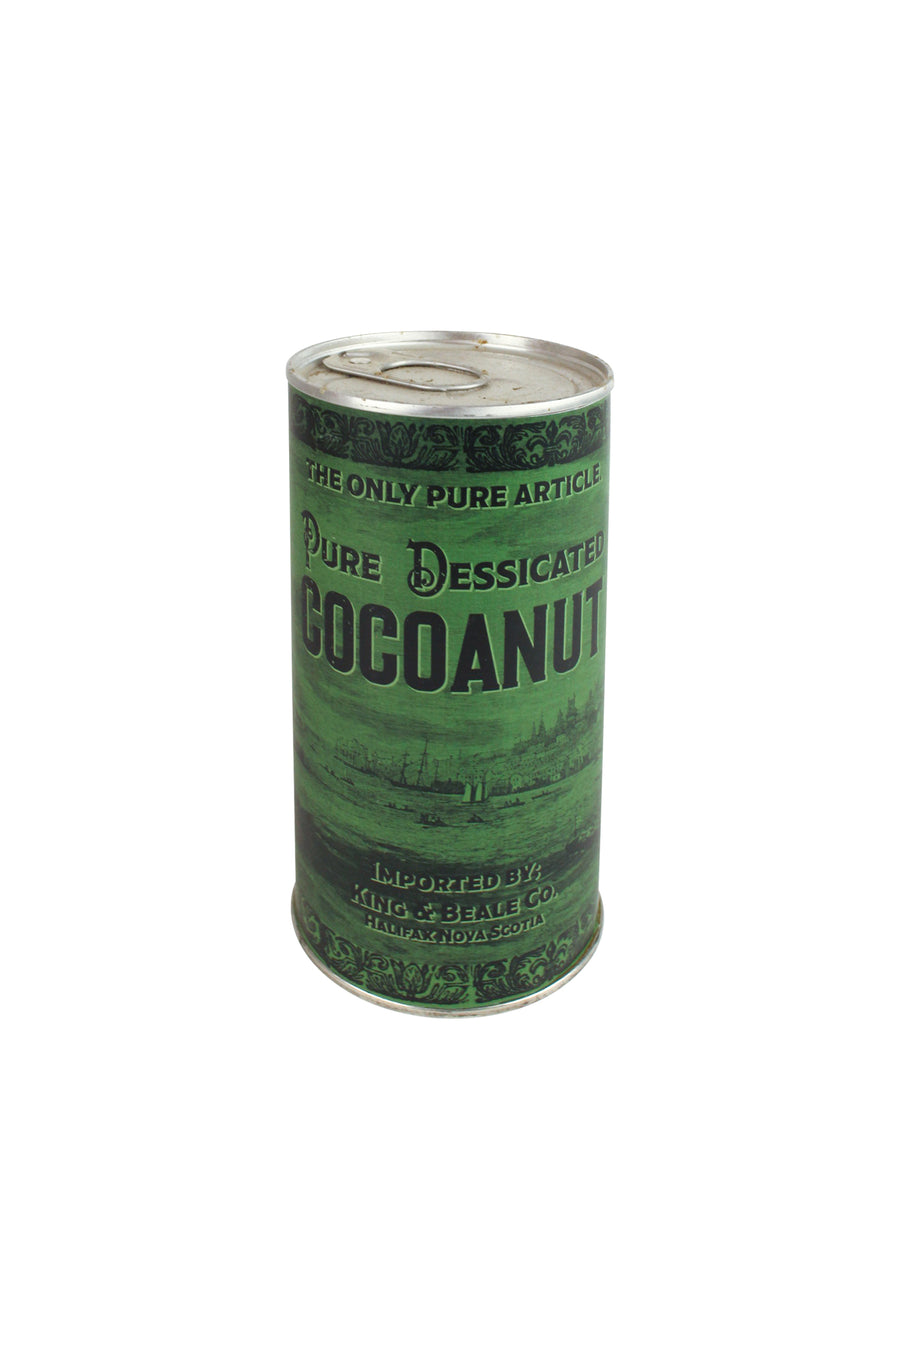 Canned Cocoanut